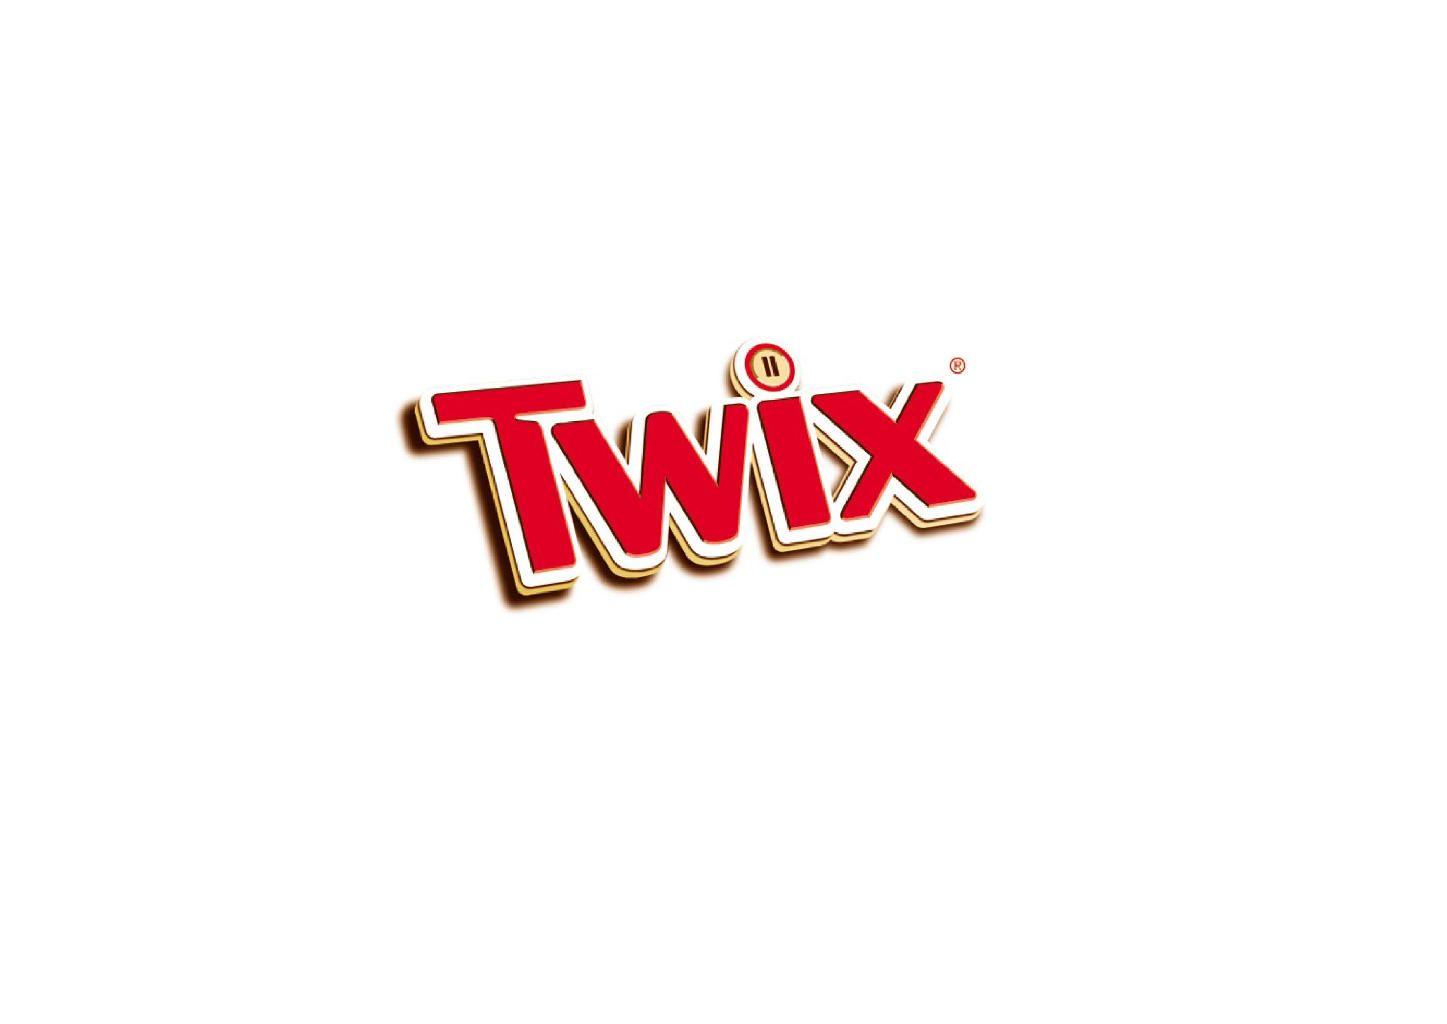 Twix Logo - Does anyone know what font is in this logo? (brand: TWIX)